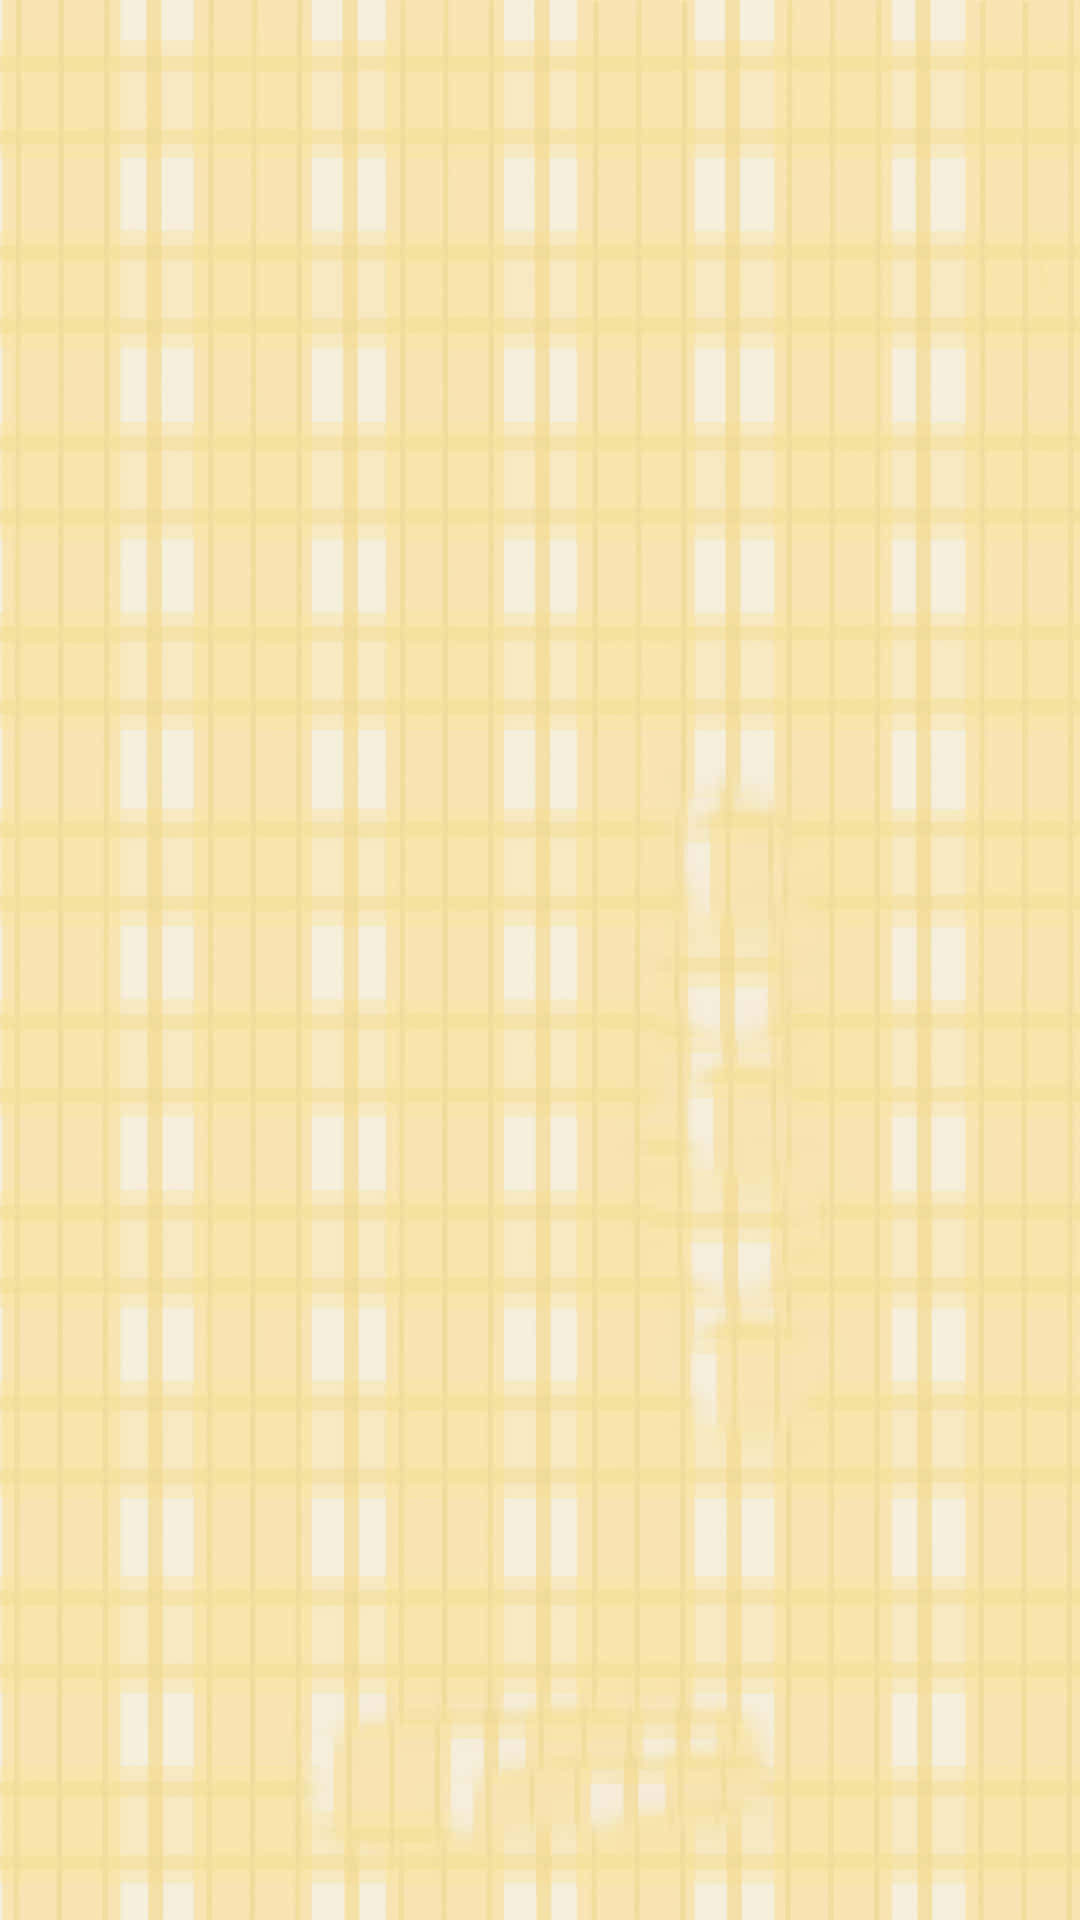 A Yellow And White Checkered Wallpaper Wallpaper